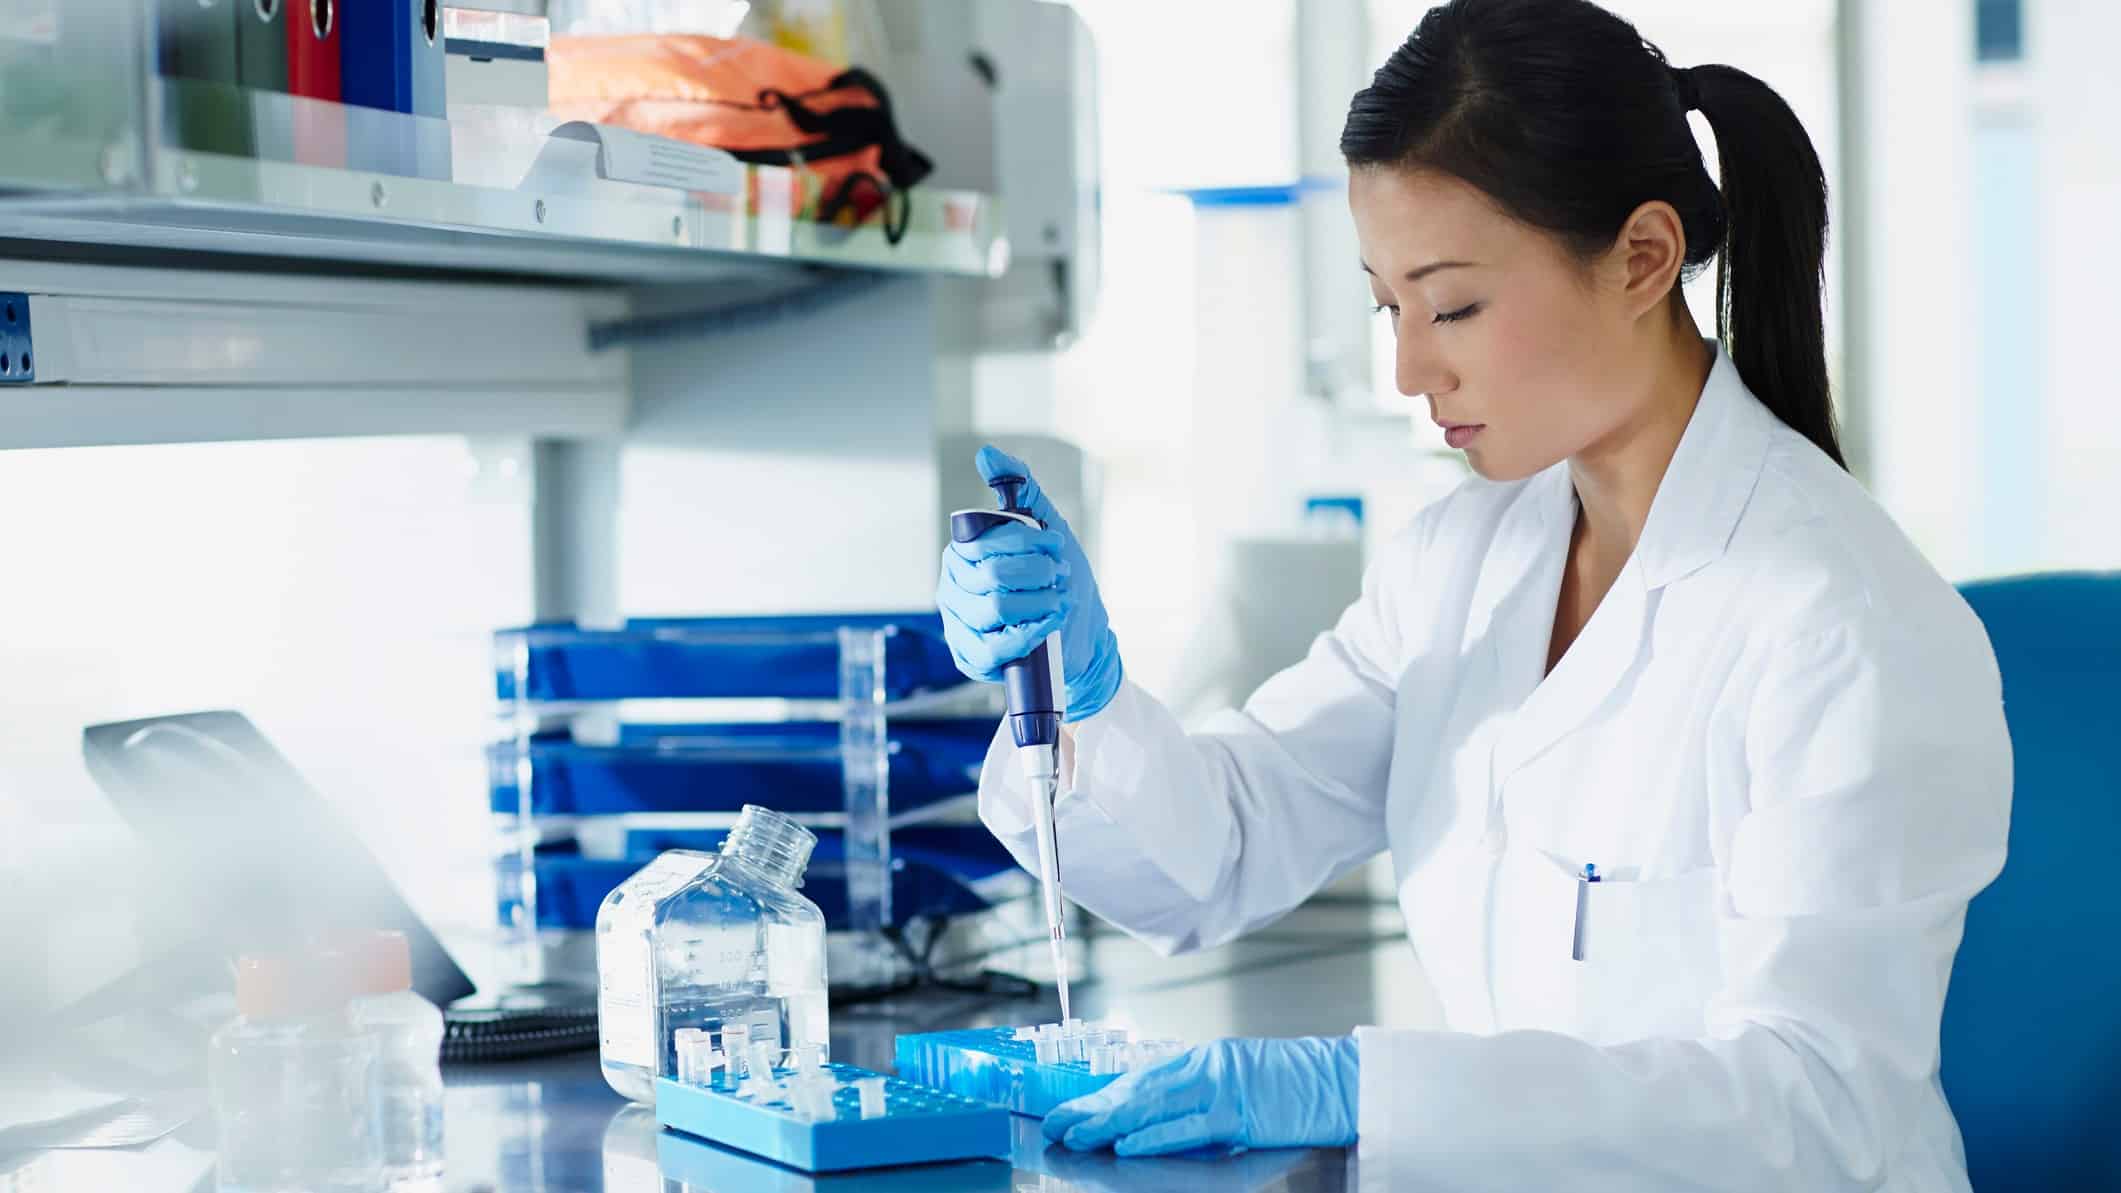 A Sonic Healthcare medical researcher wearing a white coat sits at her desk in a laboratory conducting a COVID-19 test